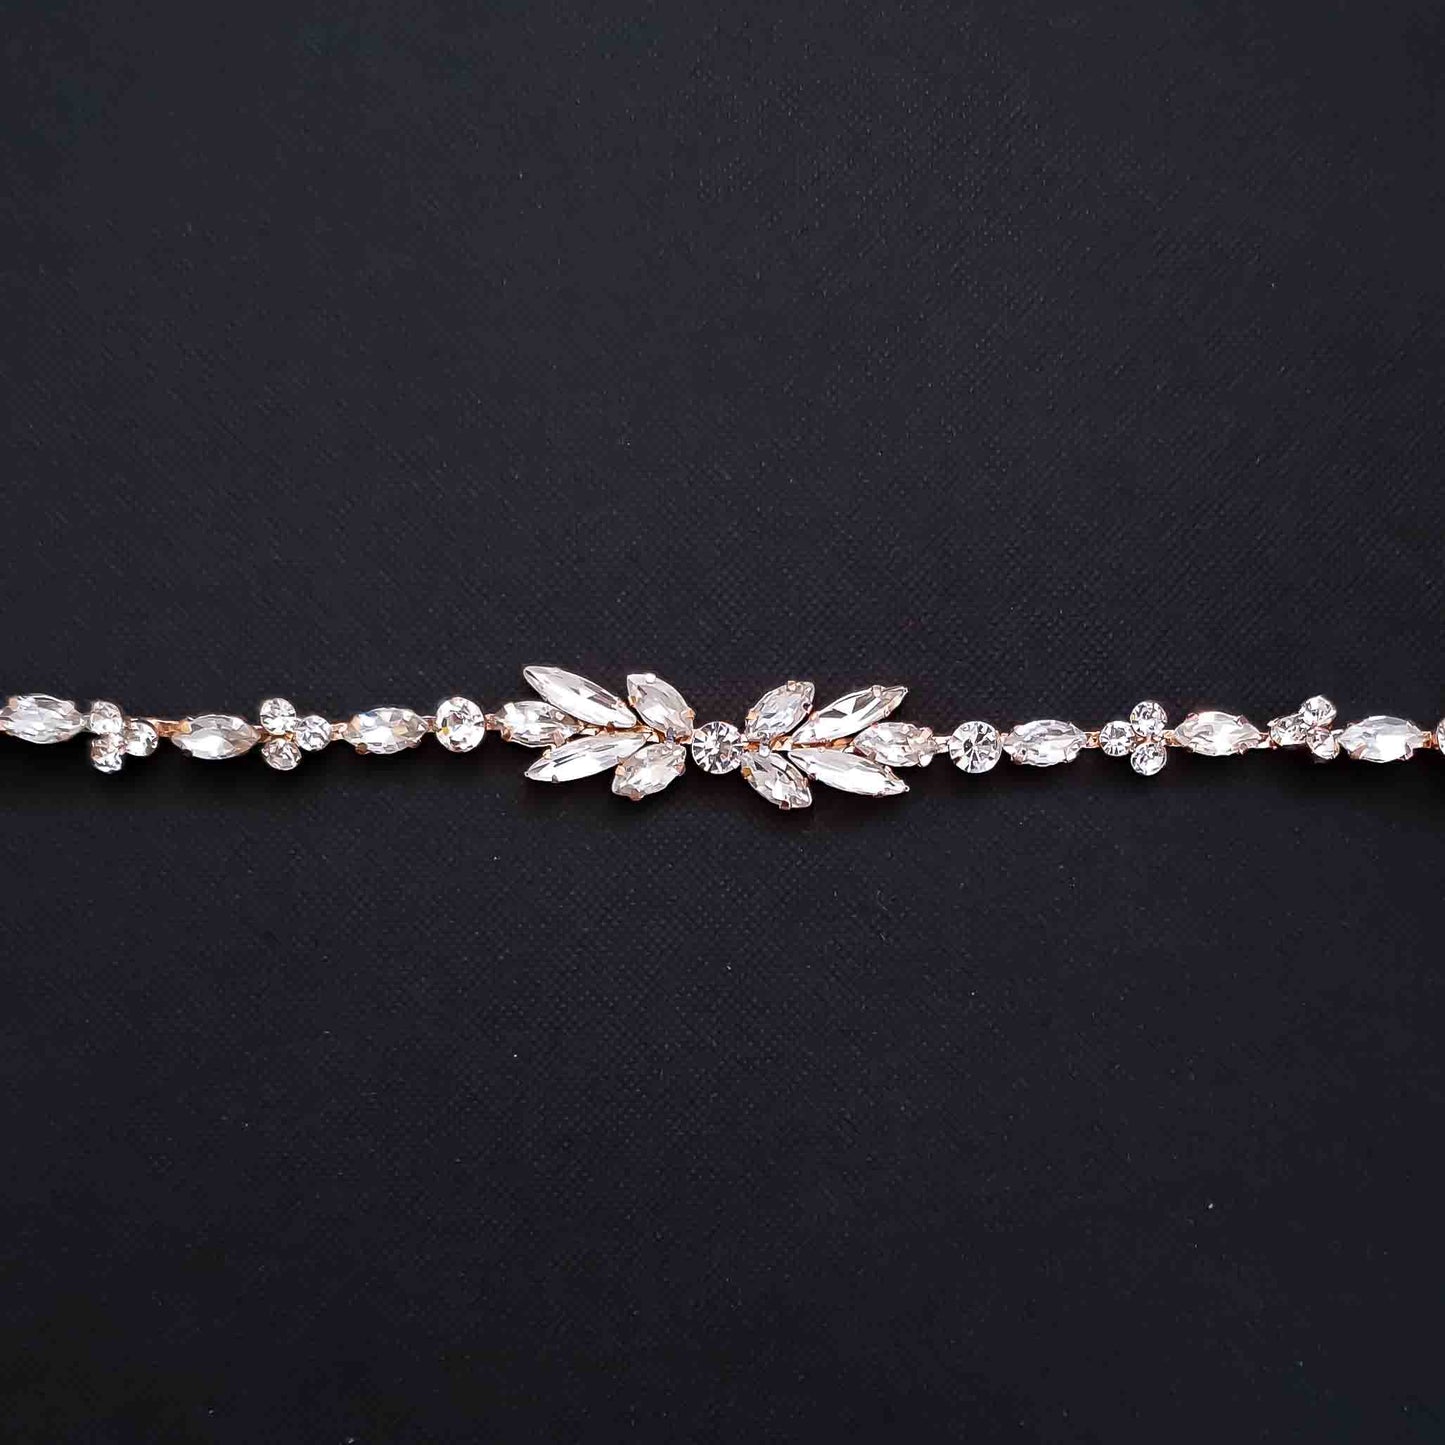 Thin Silver and Crystal Bridal Hairpiece -Haisley